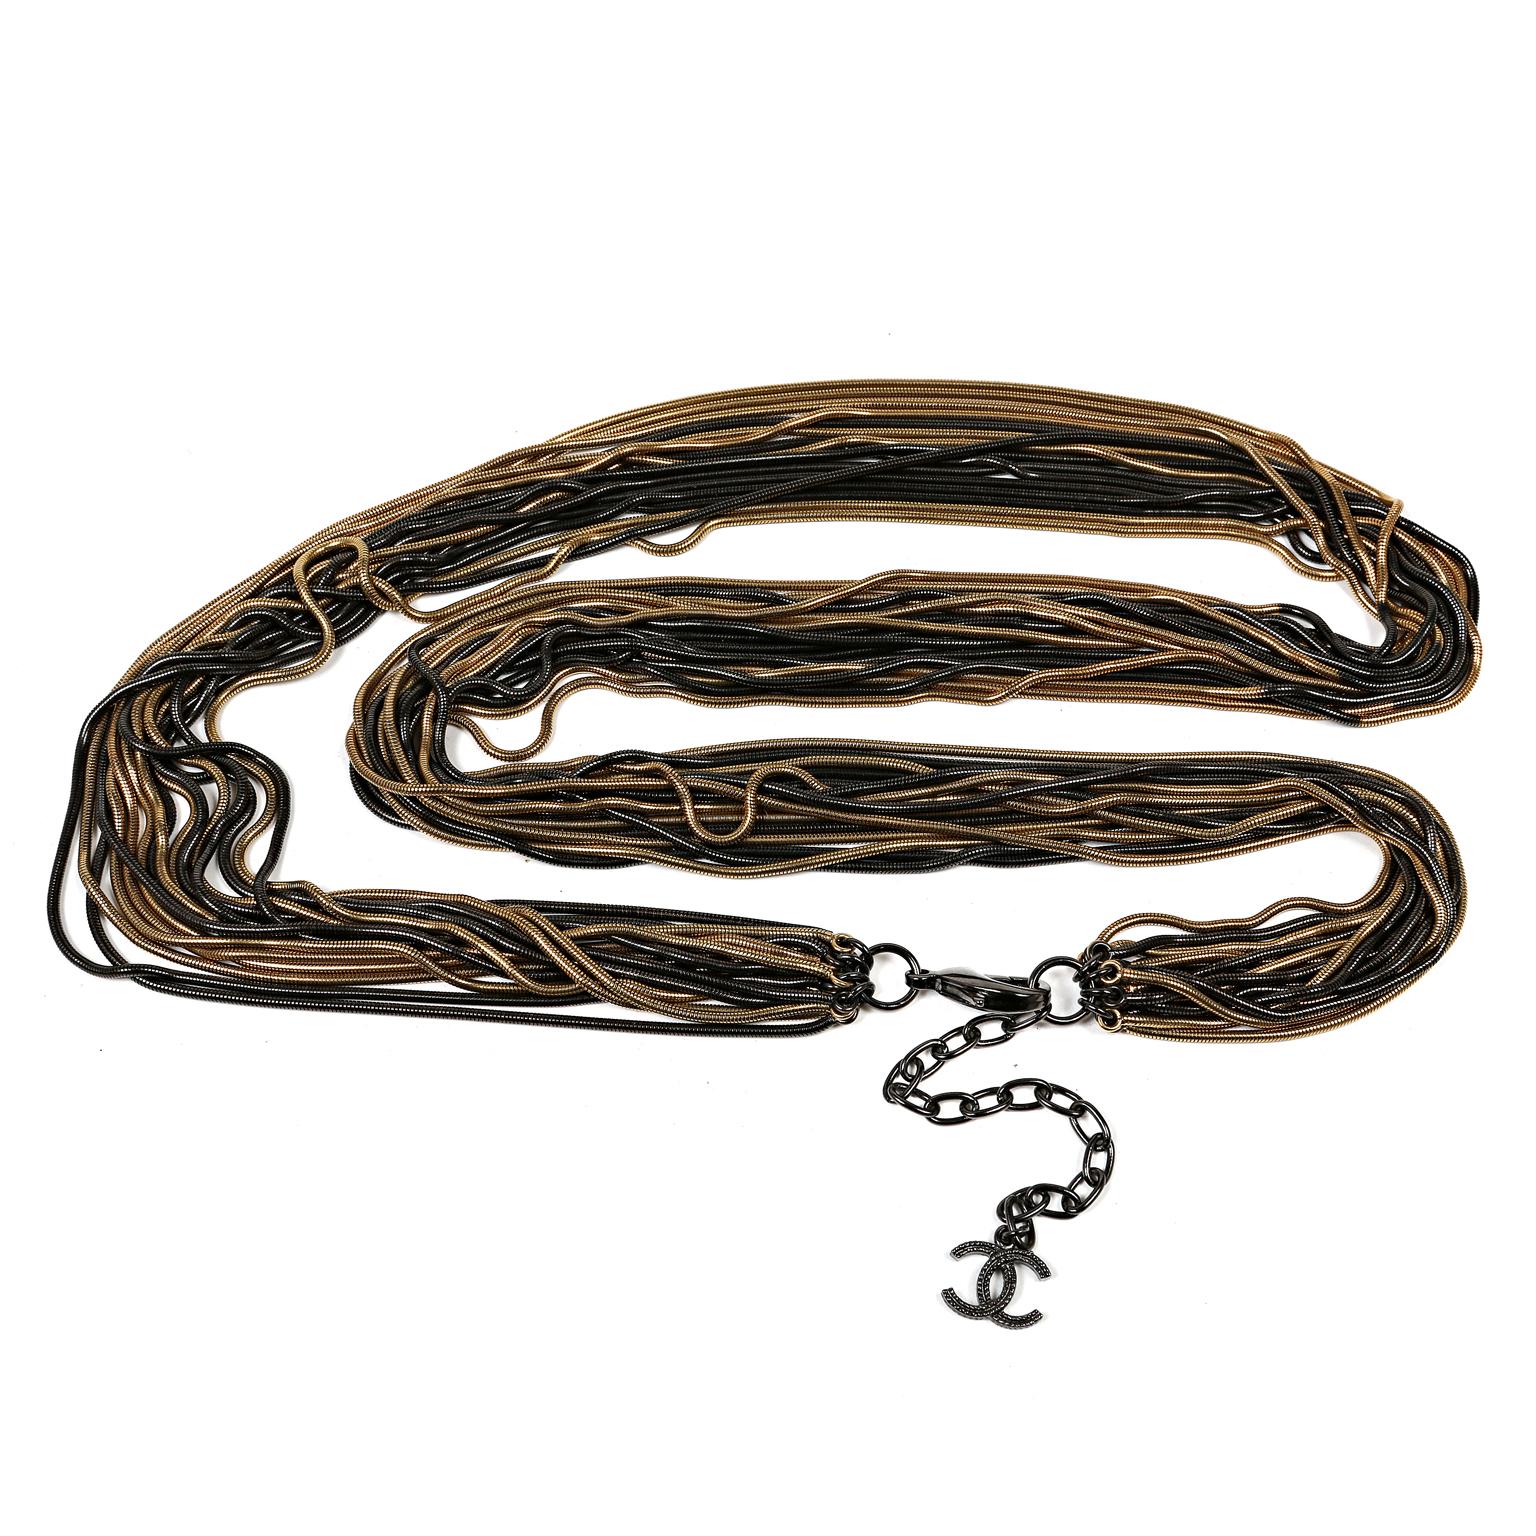 Chanel Mixed Metallic Snake Chain Necklace Belt In Excellent Condition For Sale In Palm Beach, FL